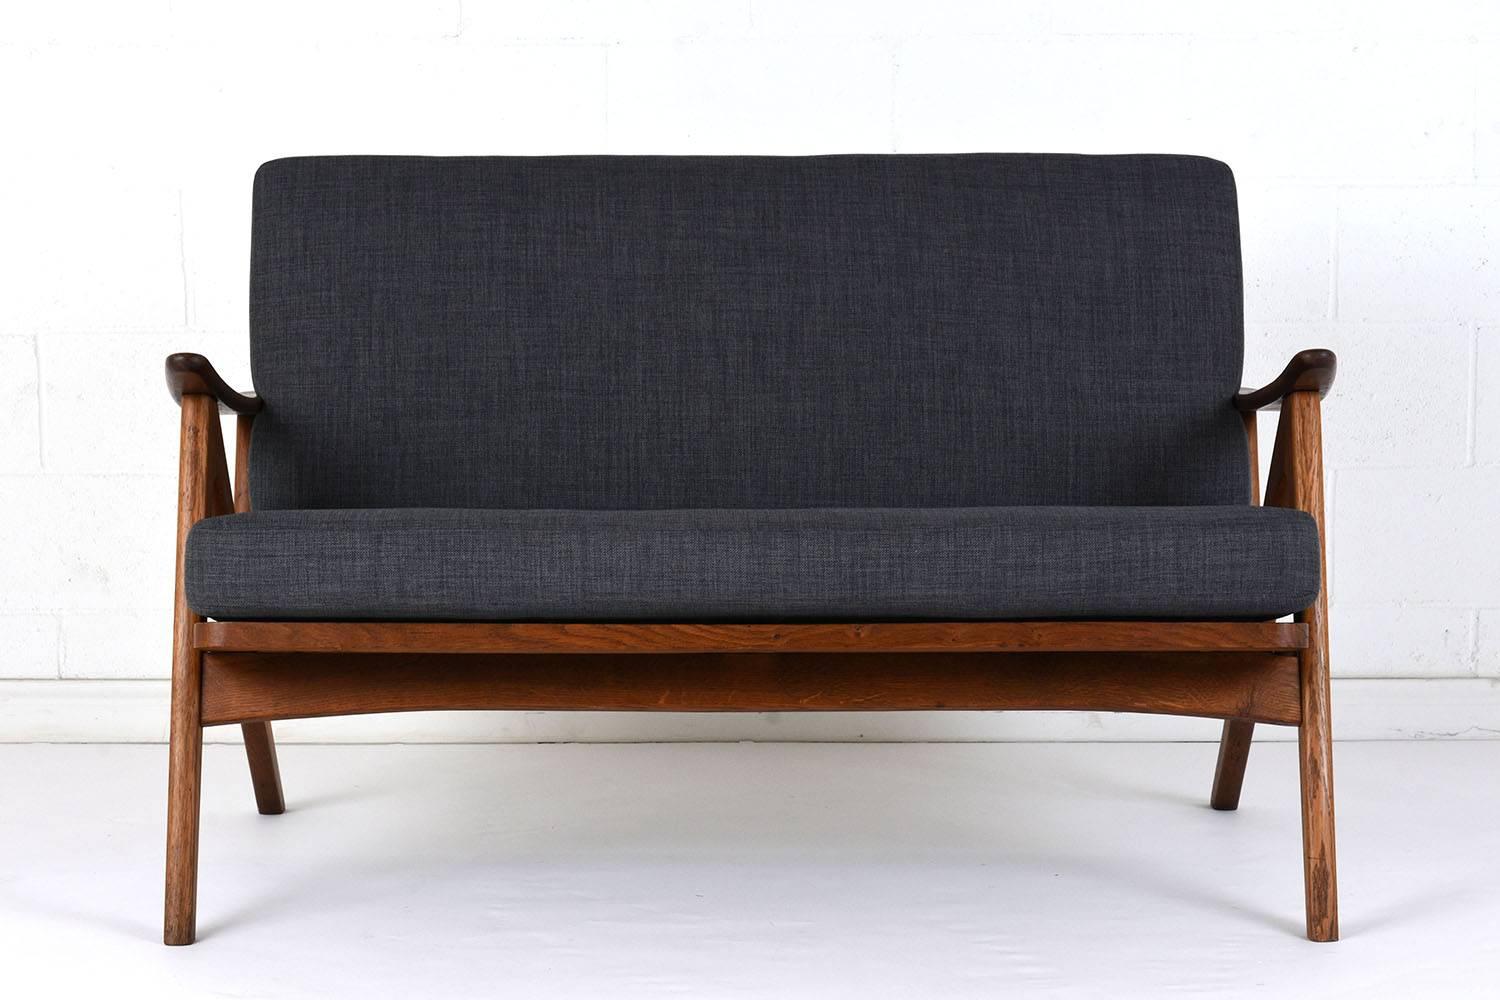 This 1960s Danish Mid-Century Modern-style love seat is designed by Arne Hovmand Olsen. The teak wood frame is carved in a double V shape and features the original walnut stain with a lacquered finish. The frame features slats along the back and